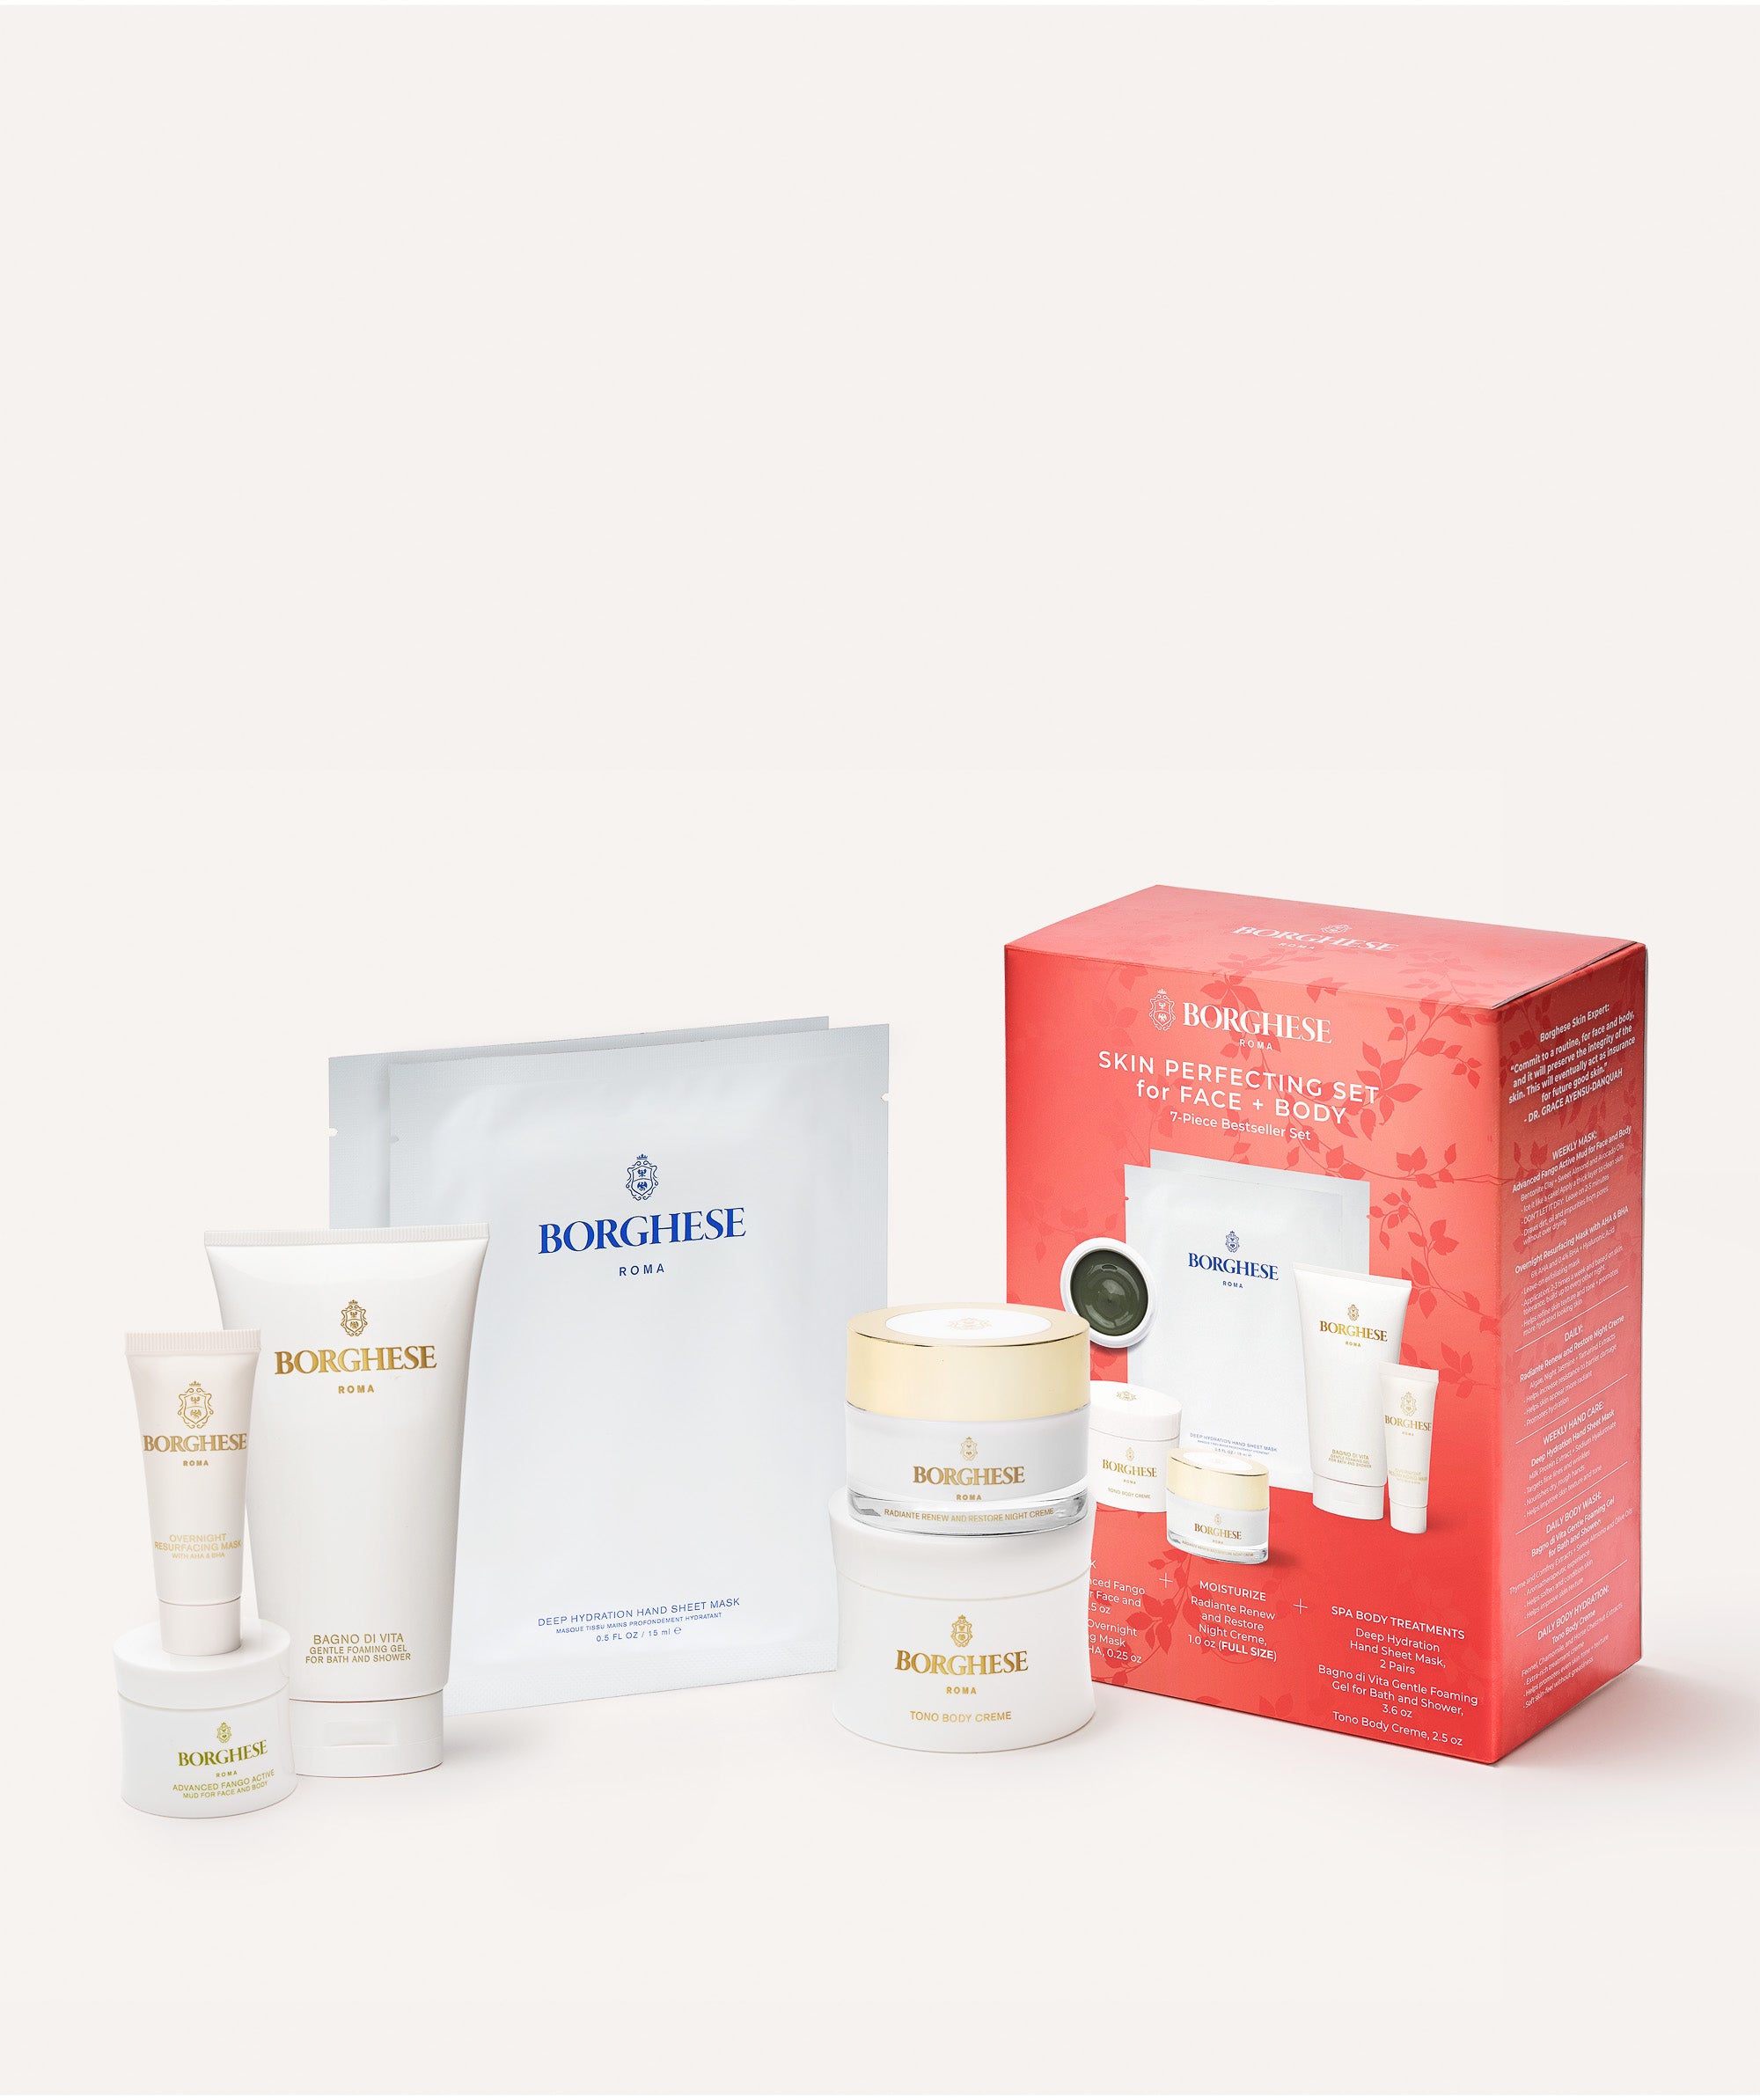 The Borghese Roma 7-Piece Skin Perfecting Gift Set contents and gift box